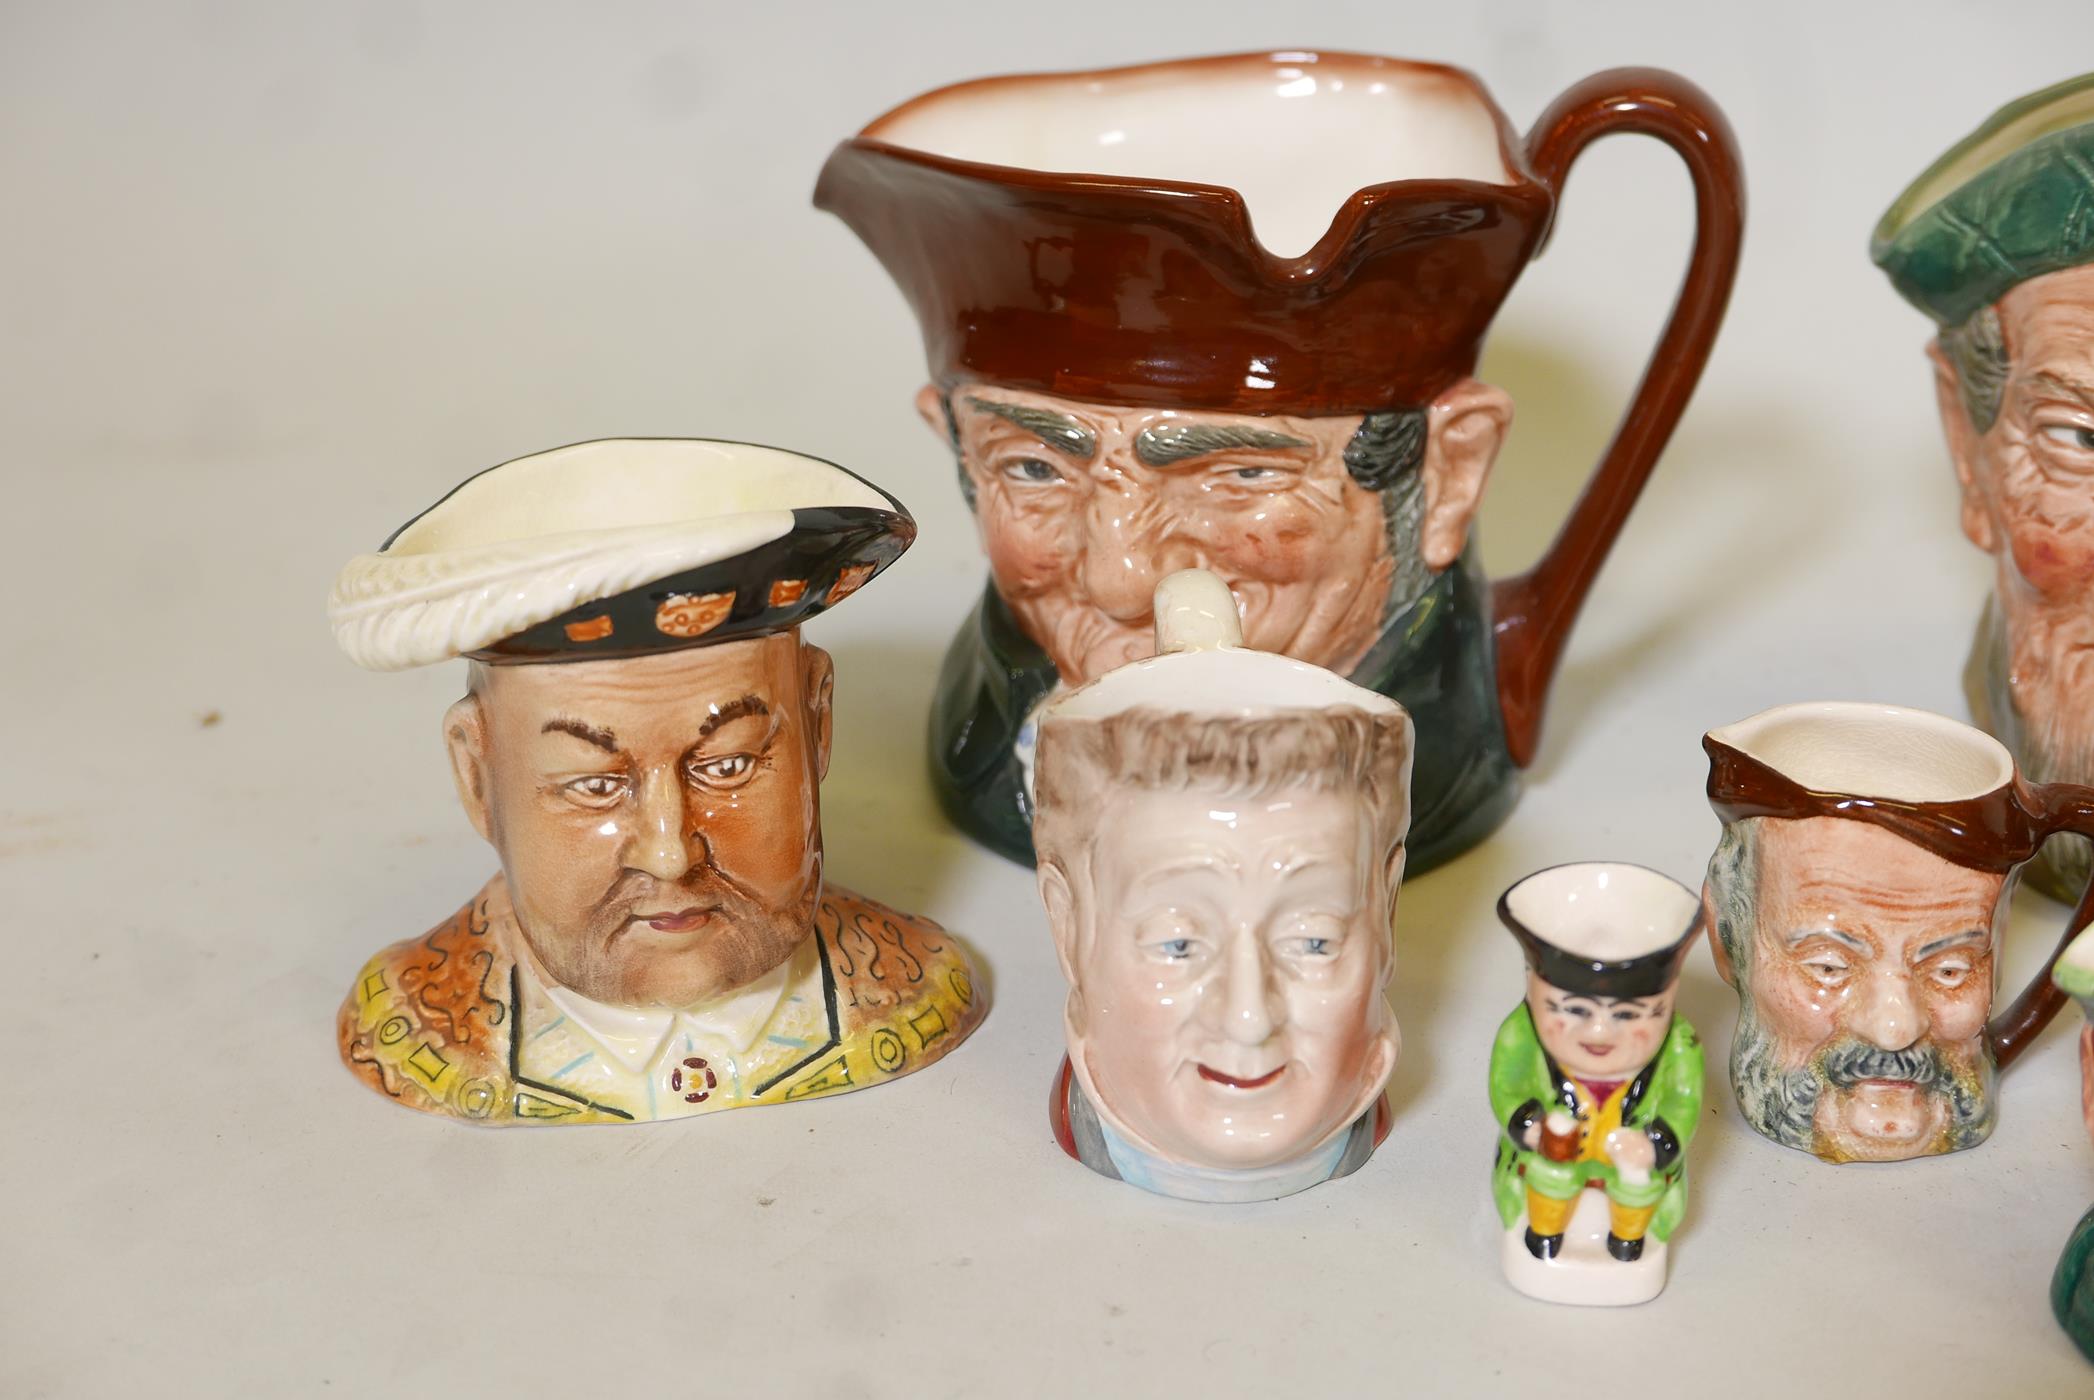 A collection of character jugs, Royal Doulton, Sylvac, etc, full size and miniature - Image 4 of 4